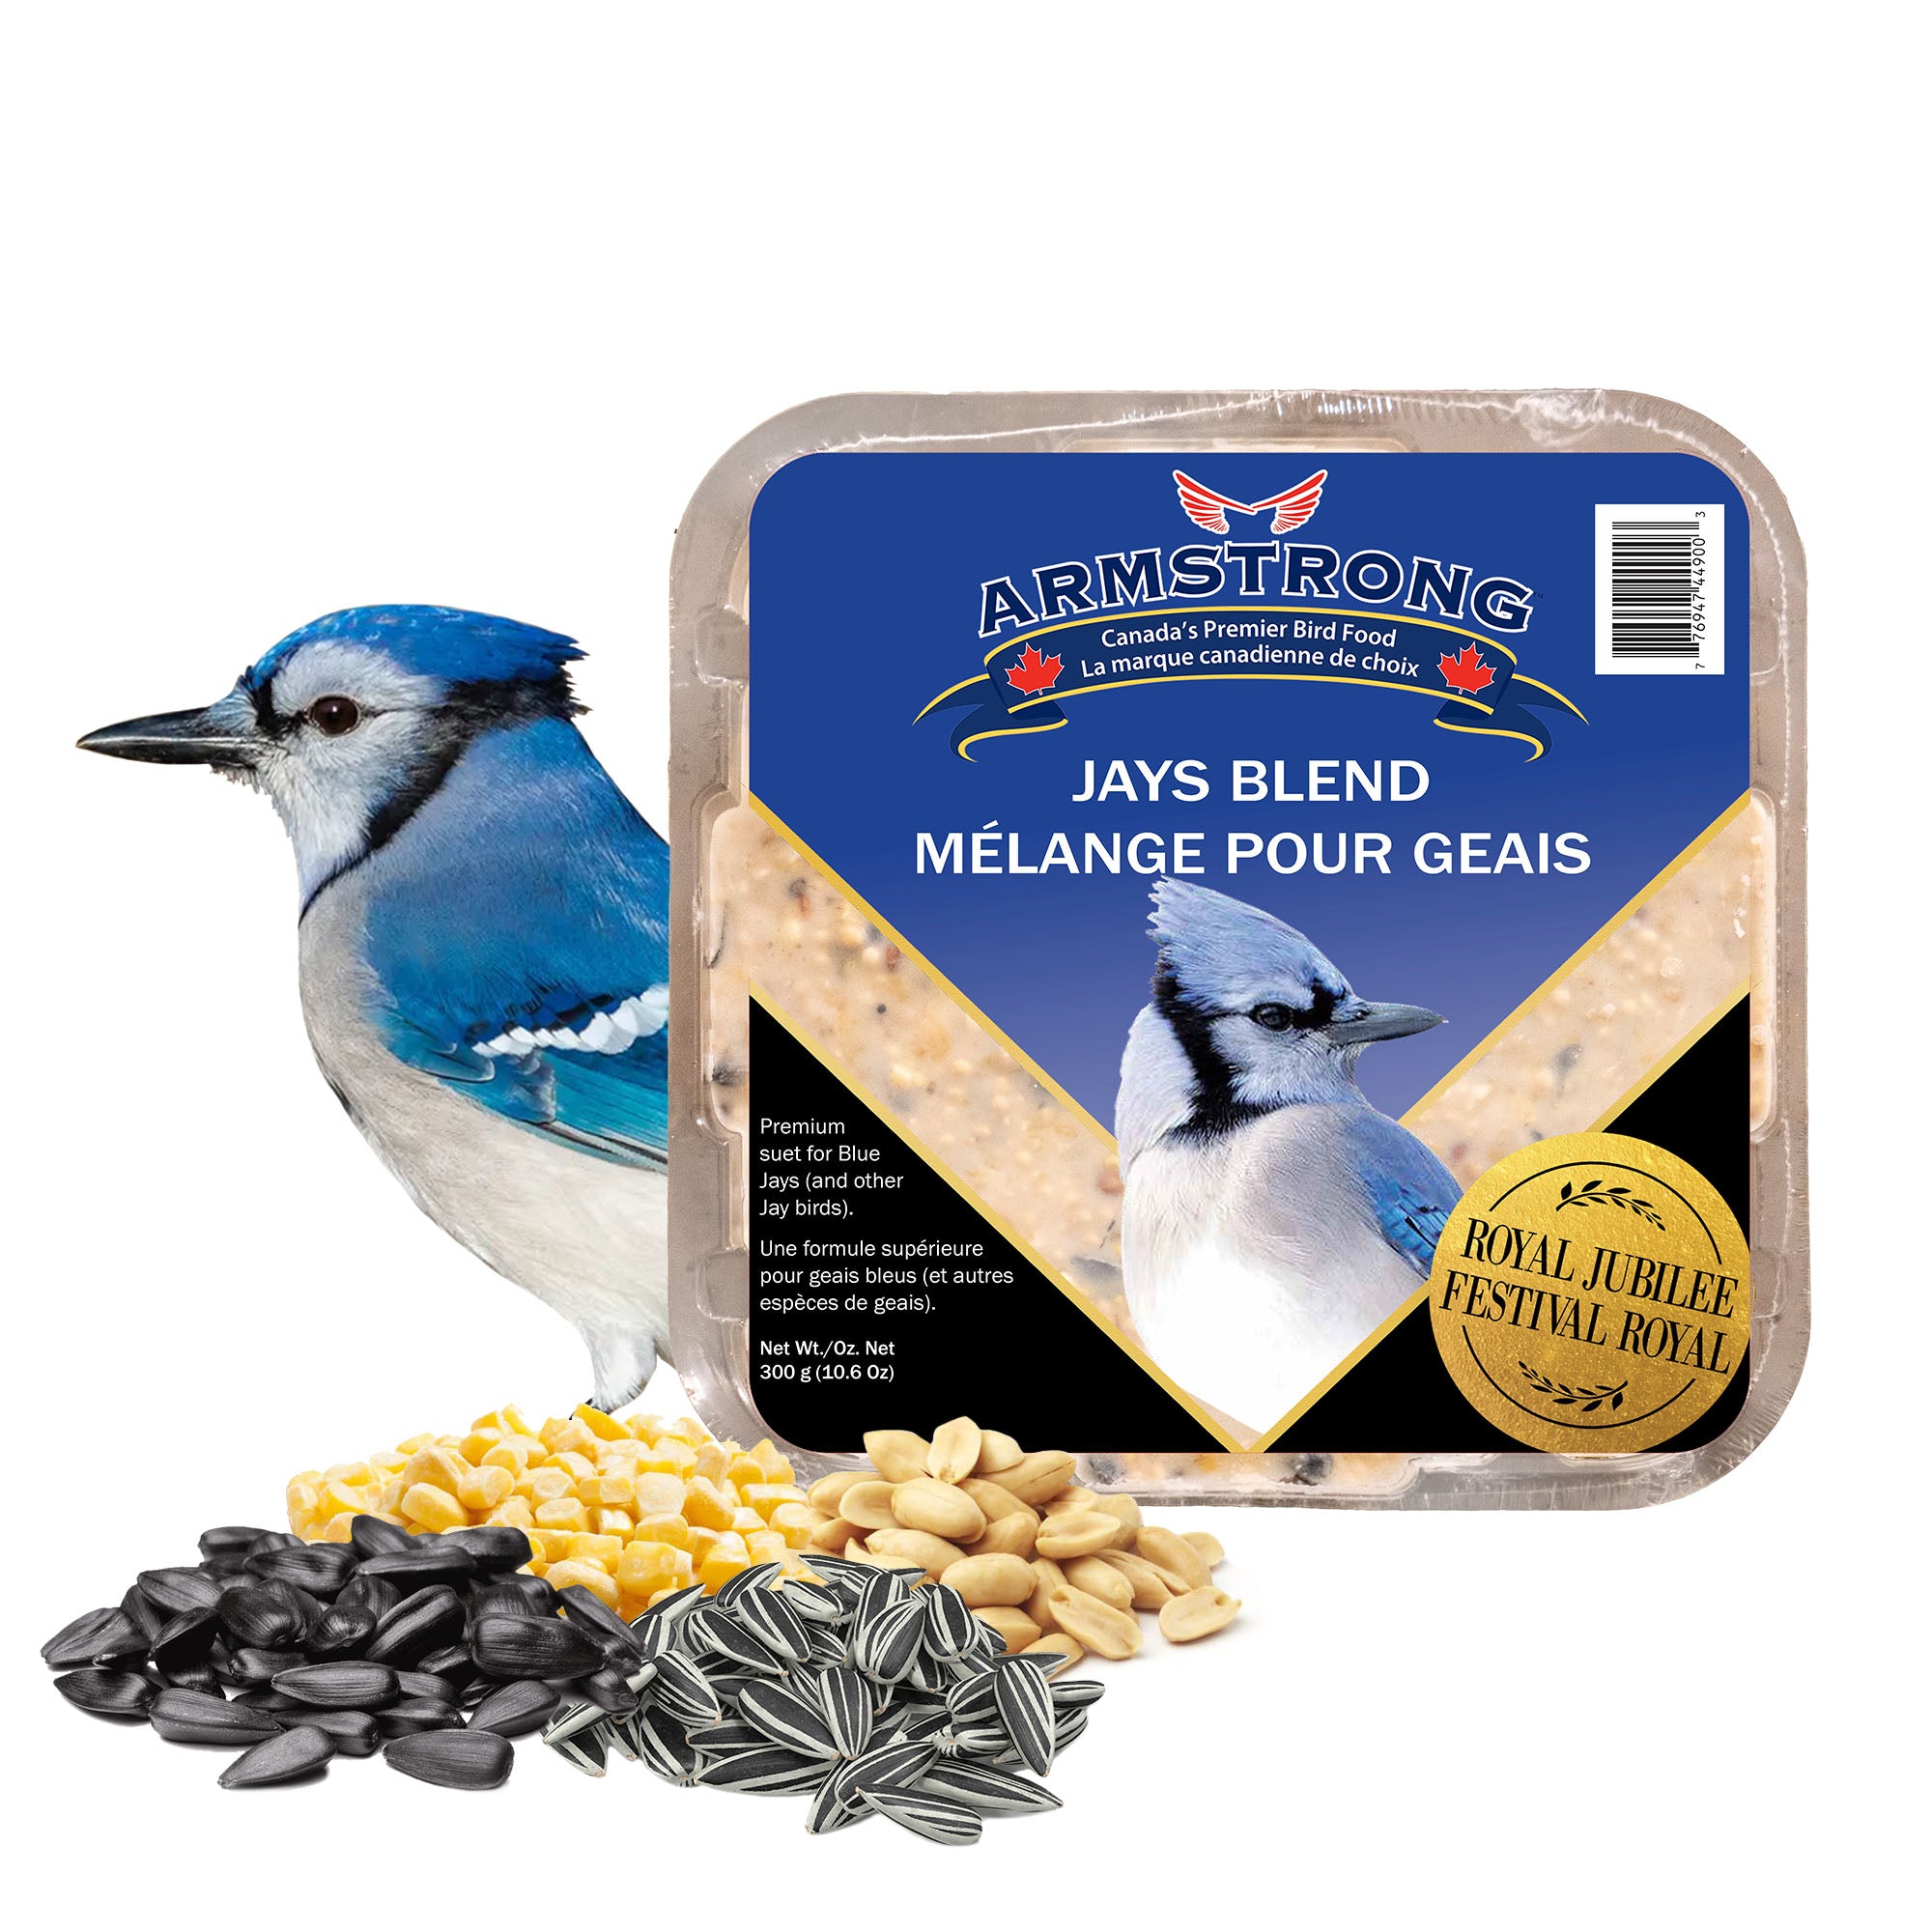 Armstrong Wild Bird Food Royal Jubilee Jay's Blend Suet for Blue Jays, 10.6oz (Pack of 3)